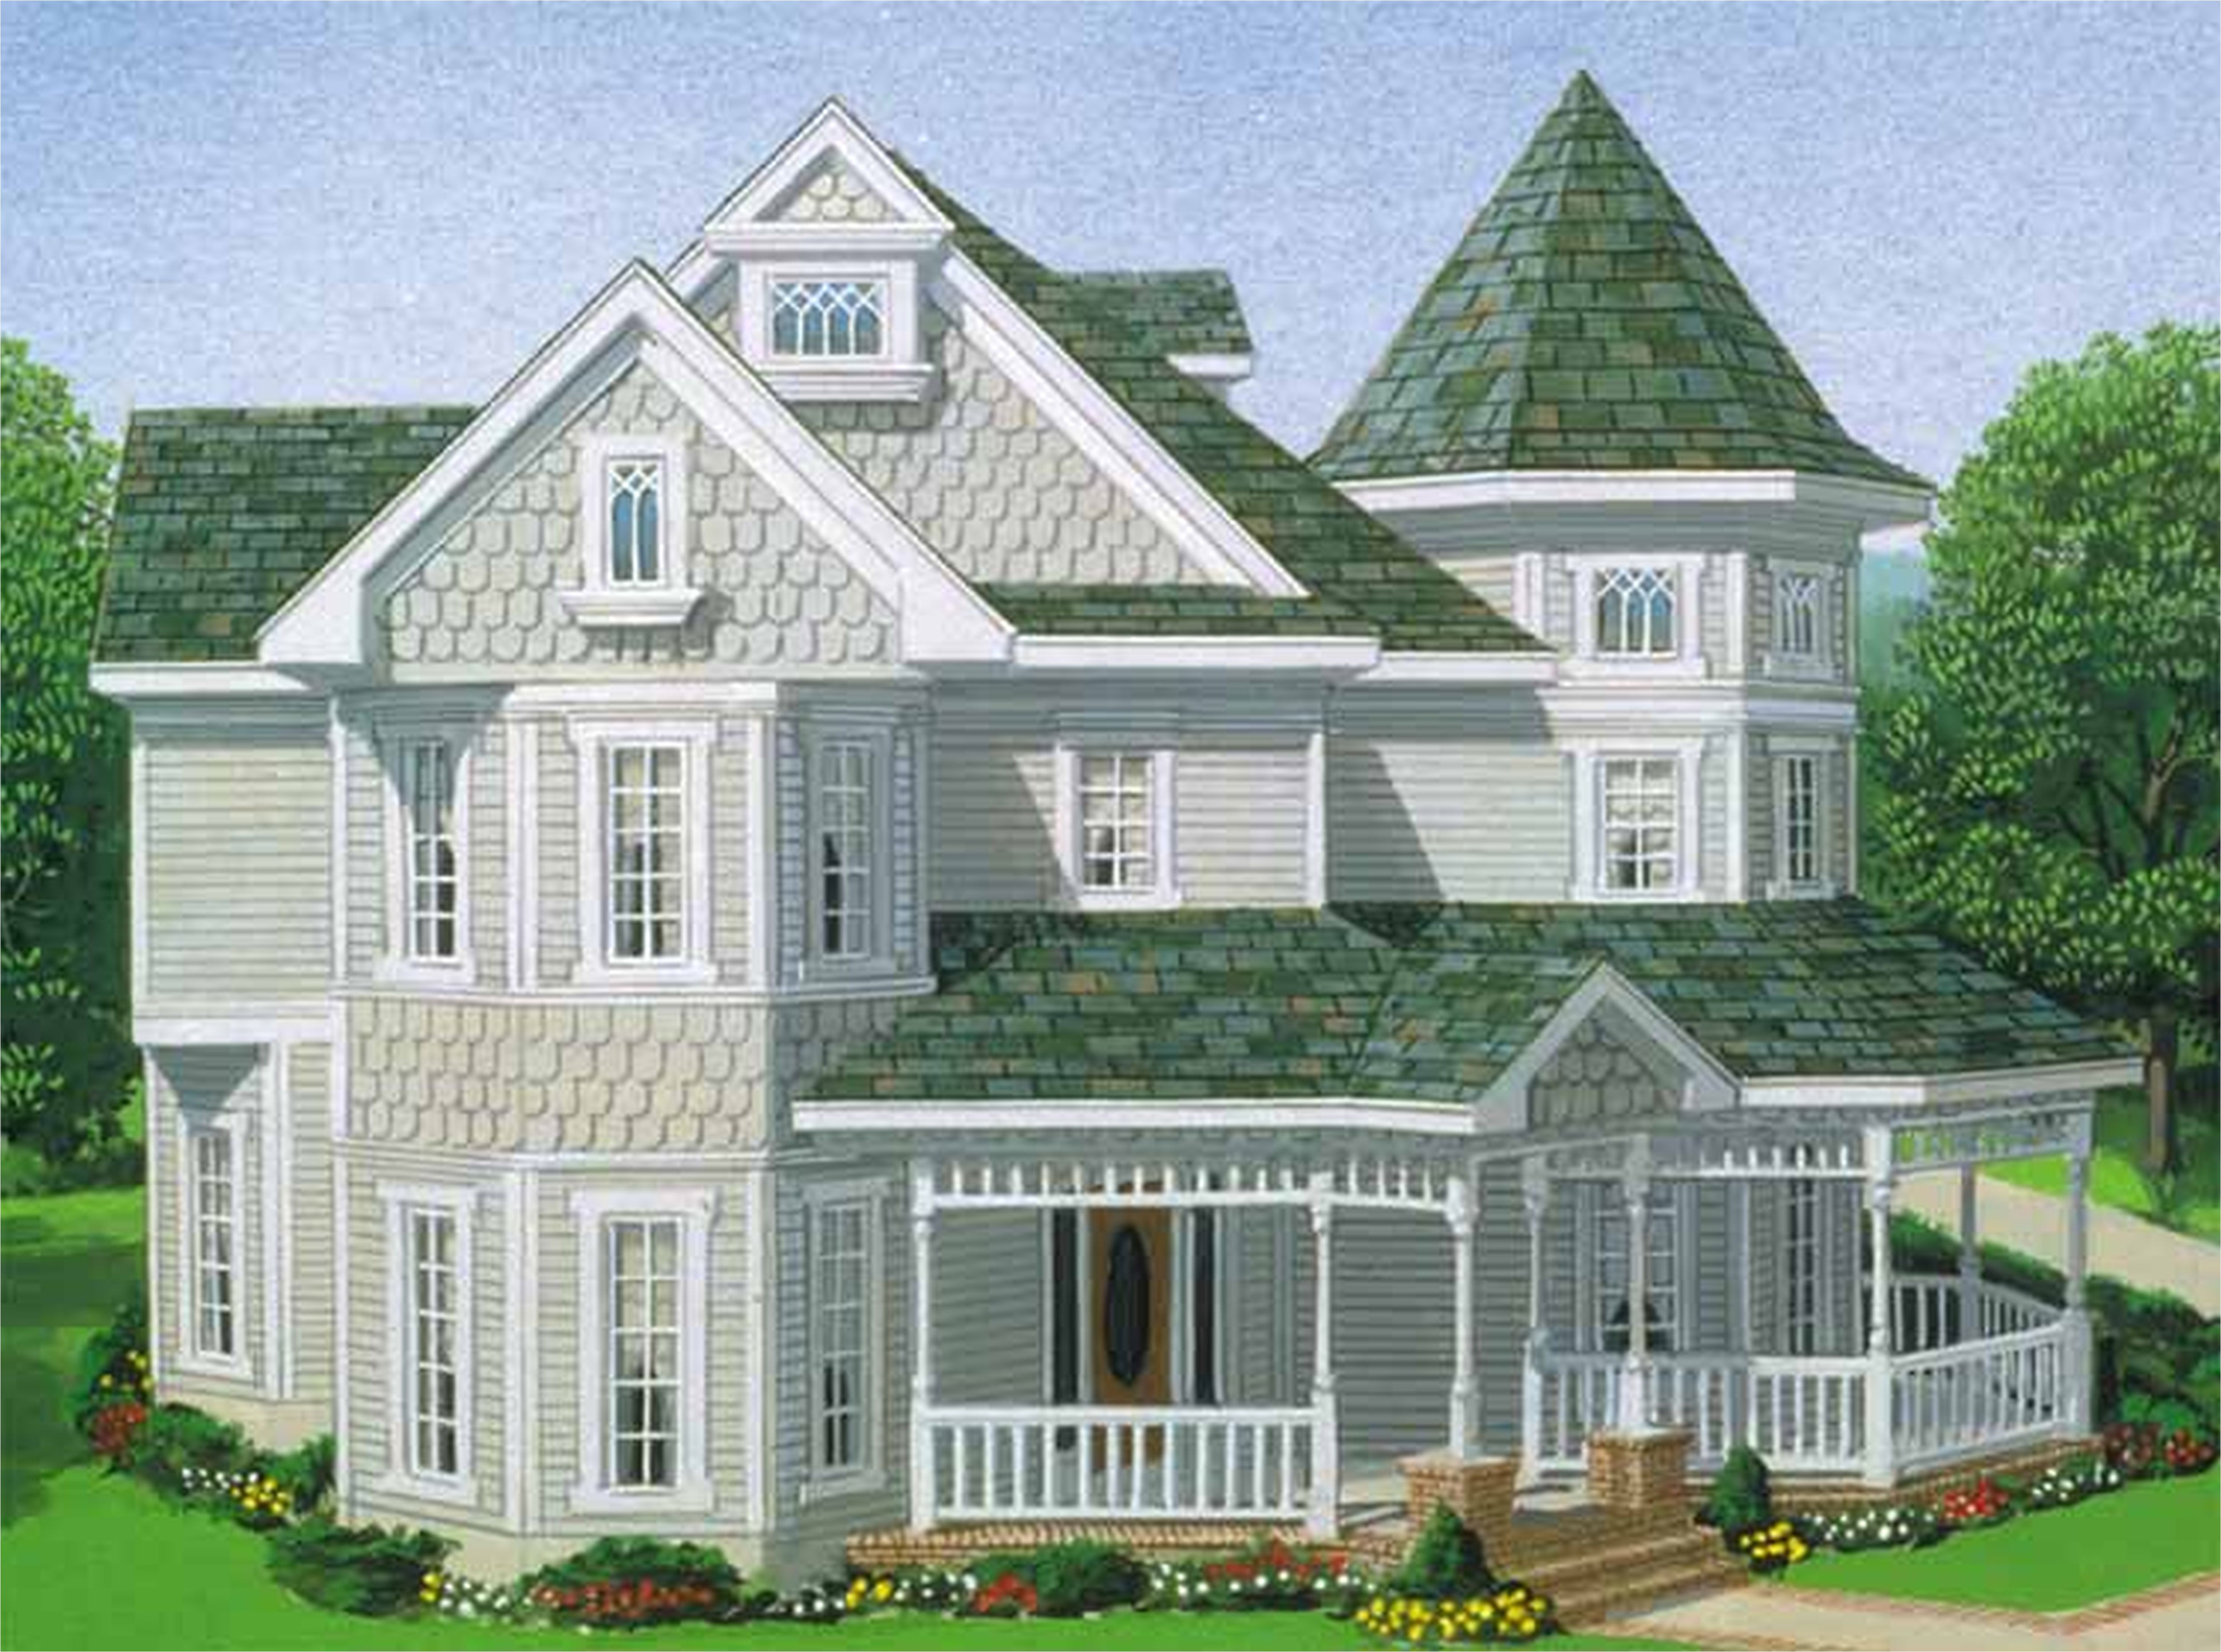 Custom Home Plans and Cost to Build Beauteous 40 Cheap Home Designs to Build Inspiration